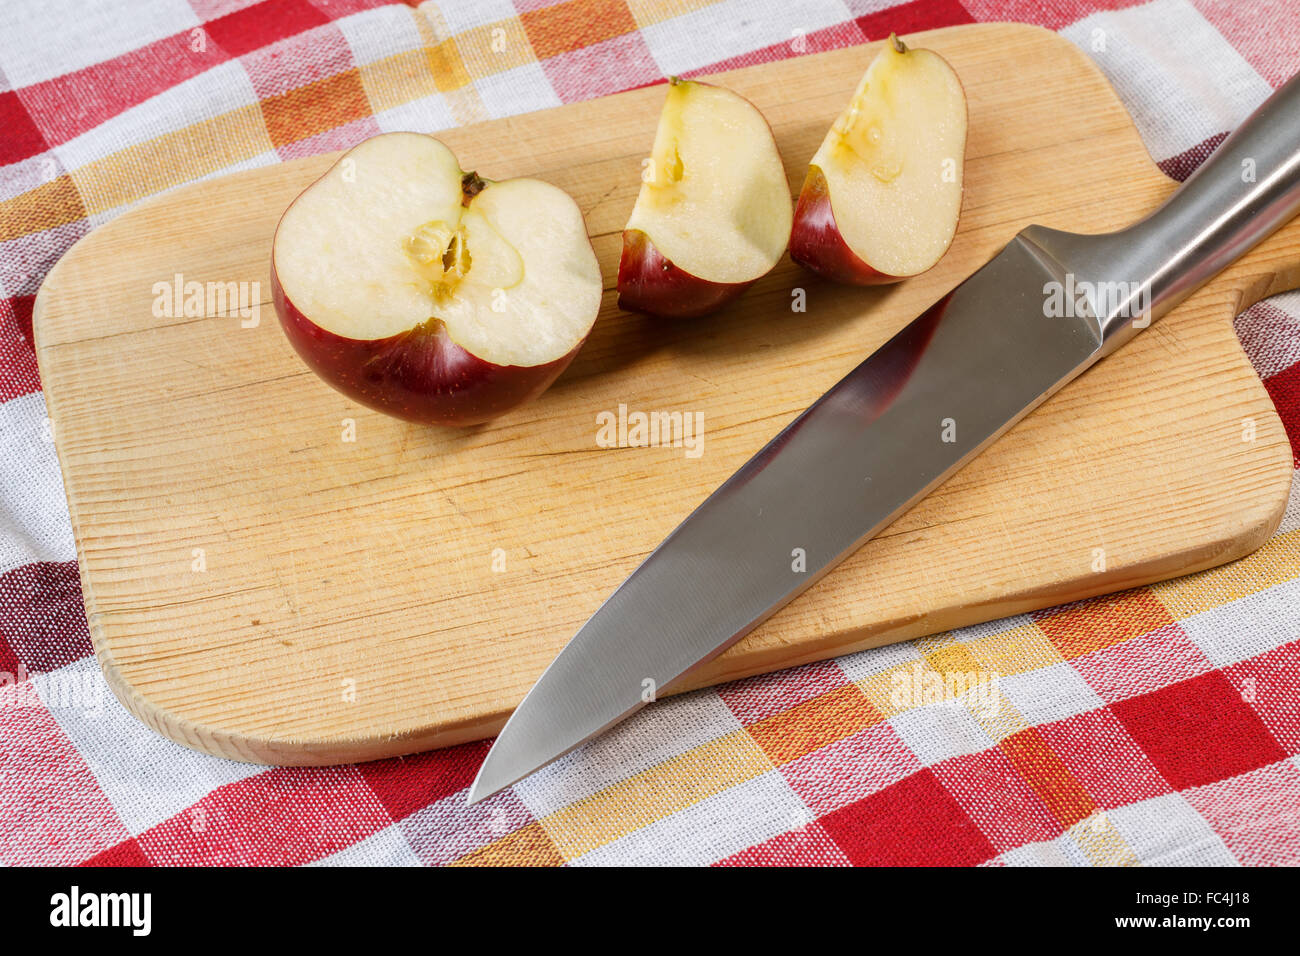 Red apple on cutting board with knife Stock Photo